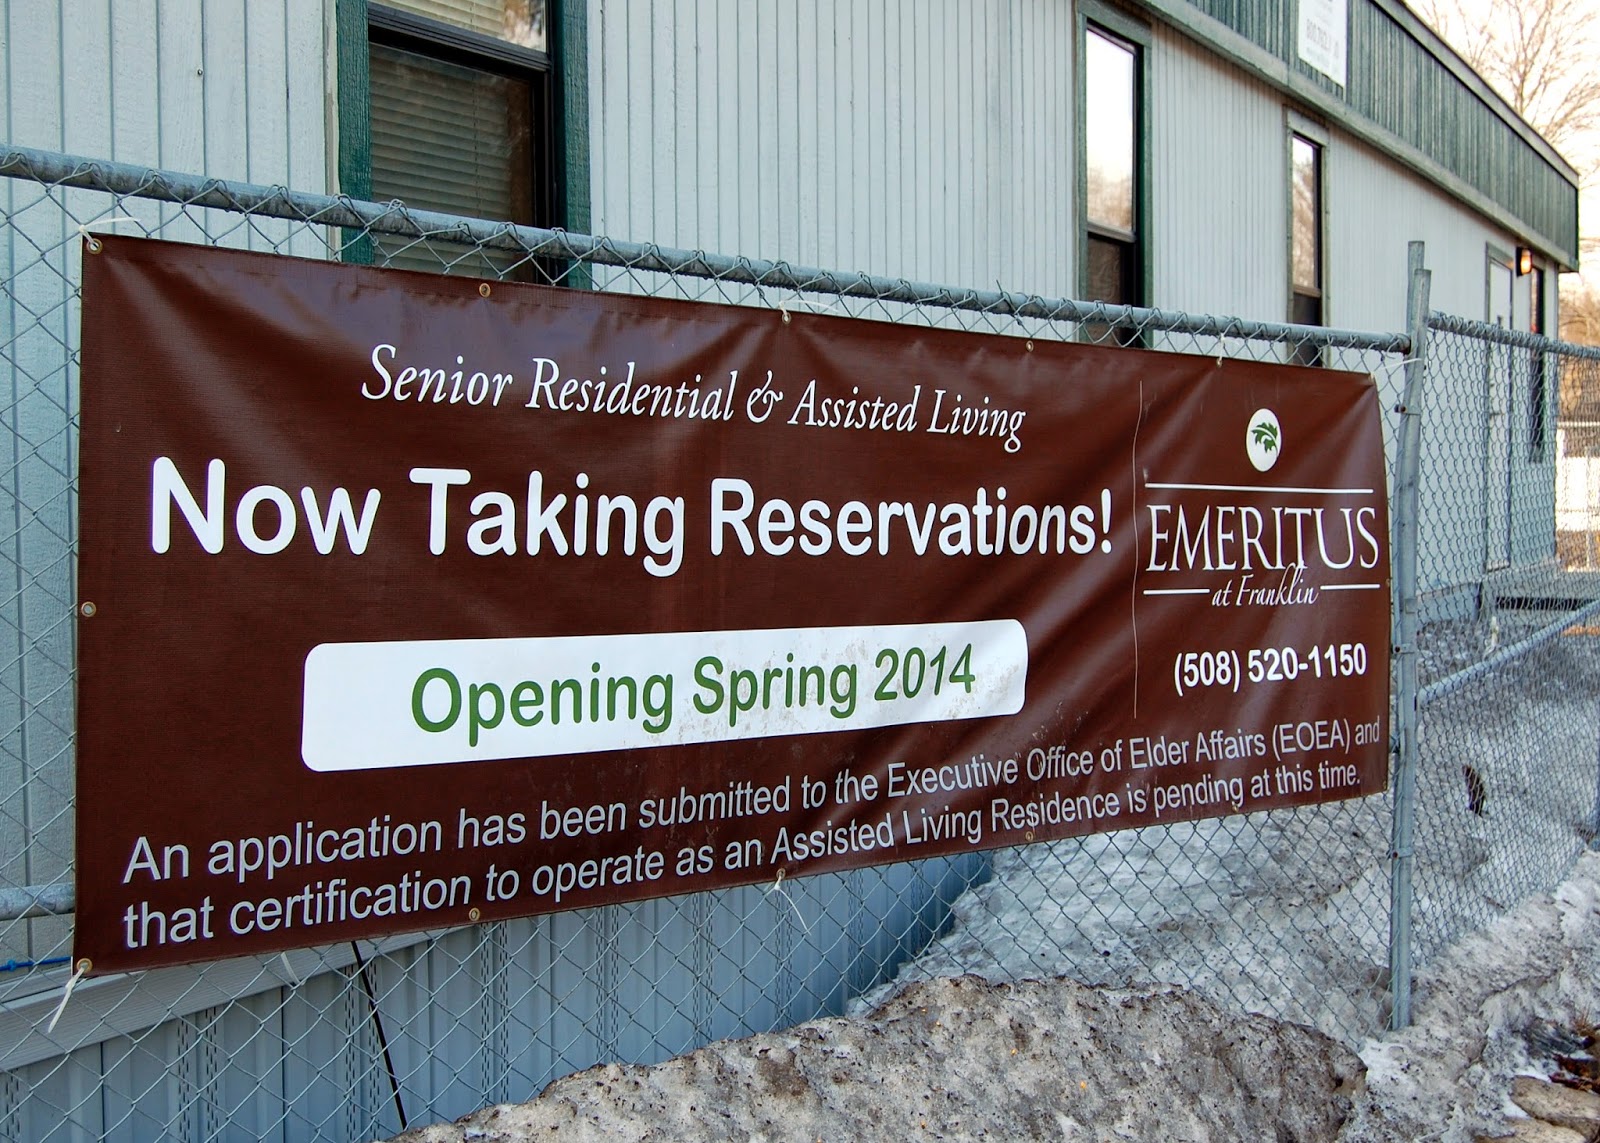 Emeritus at 656 King St opening in May 2014